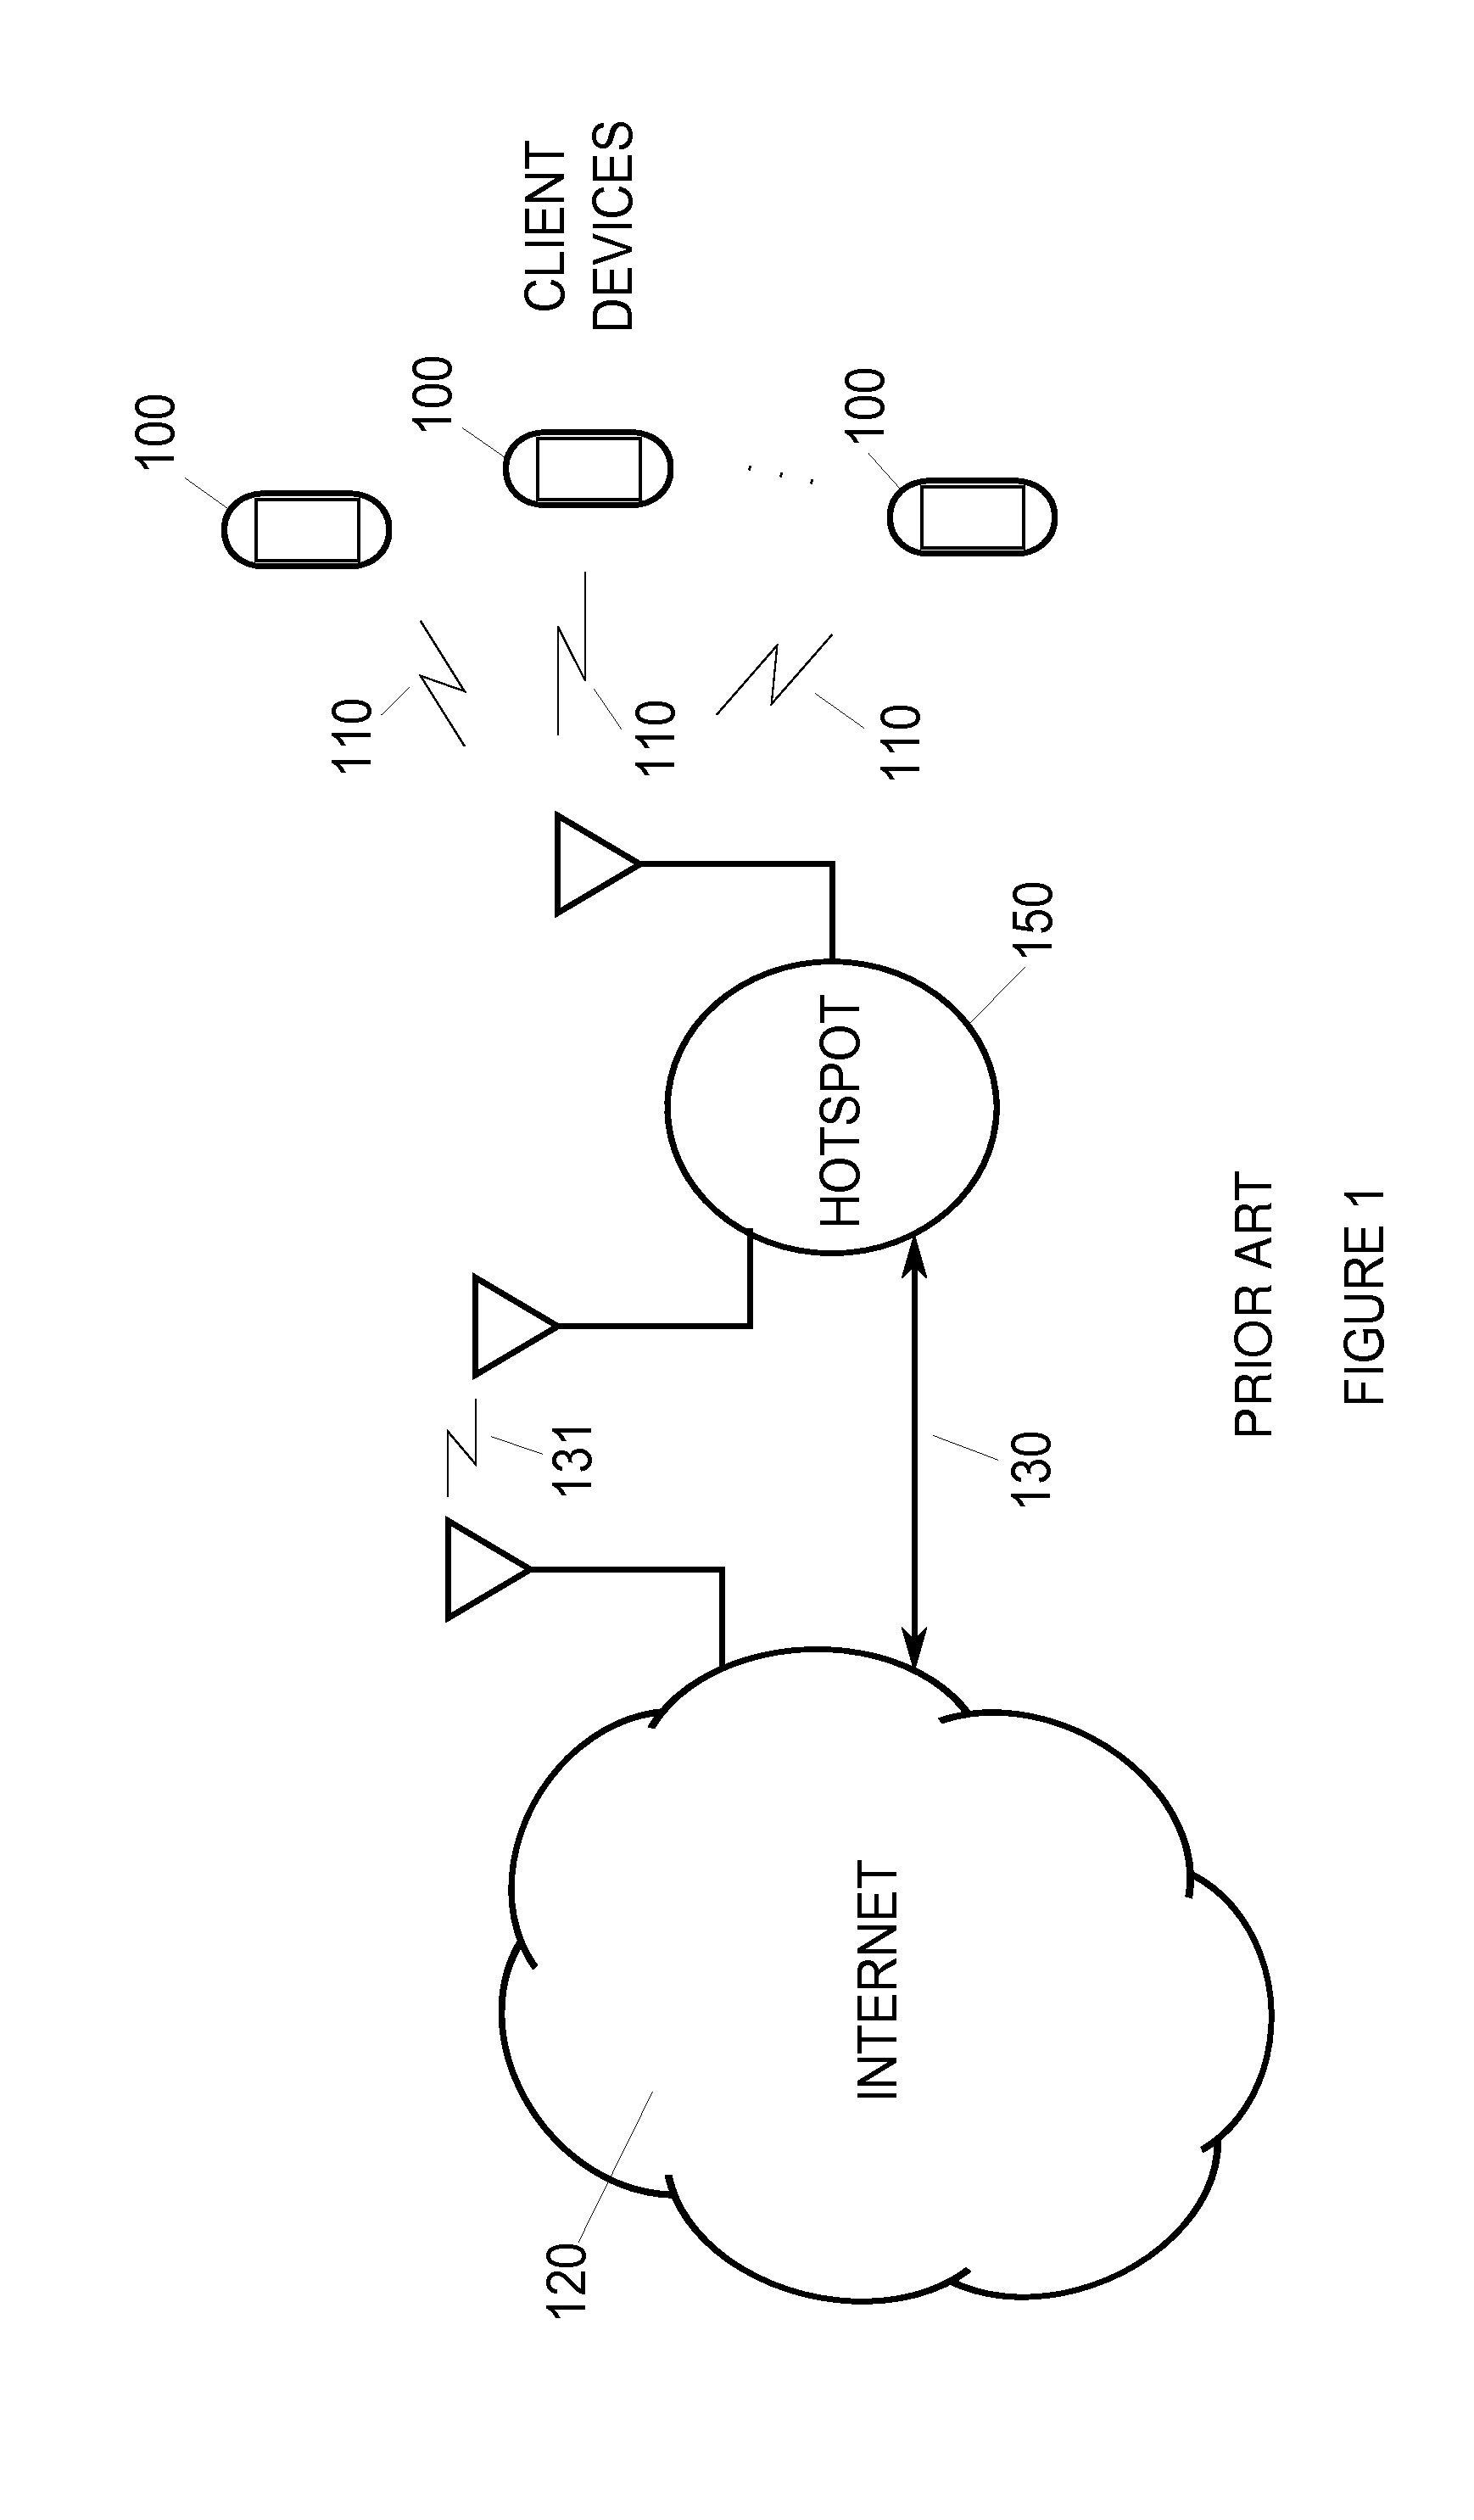 High capacity network communication link using multiple cellular devices